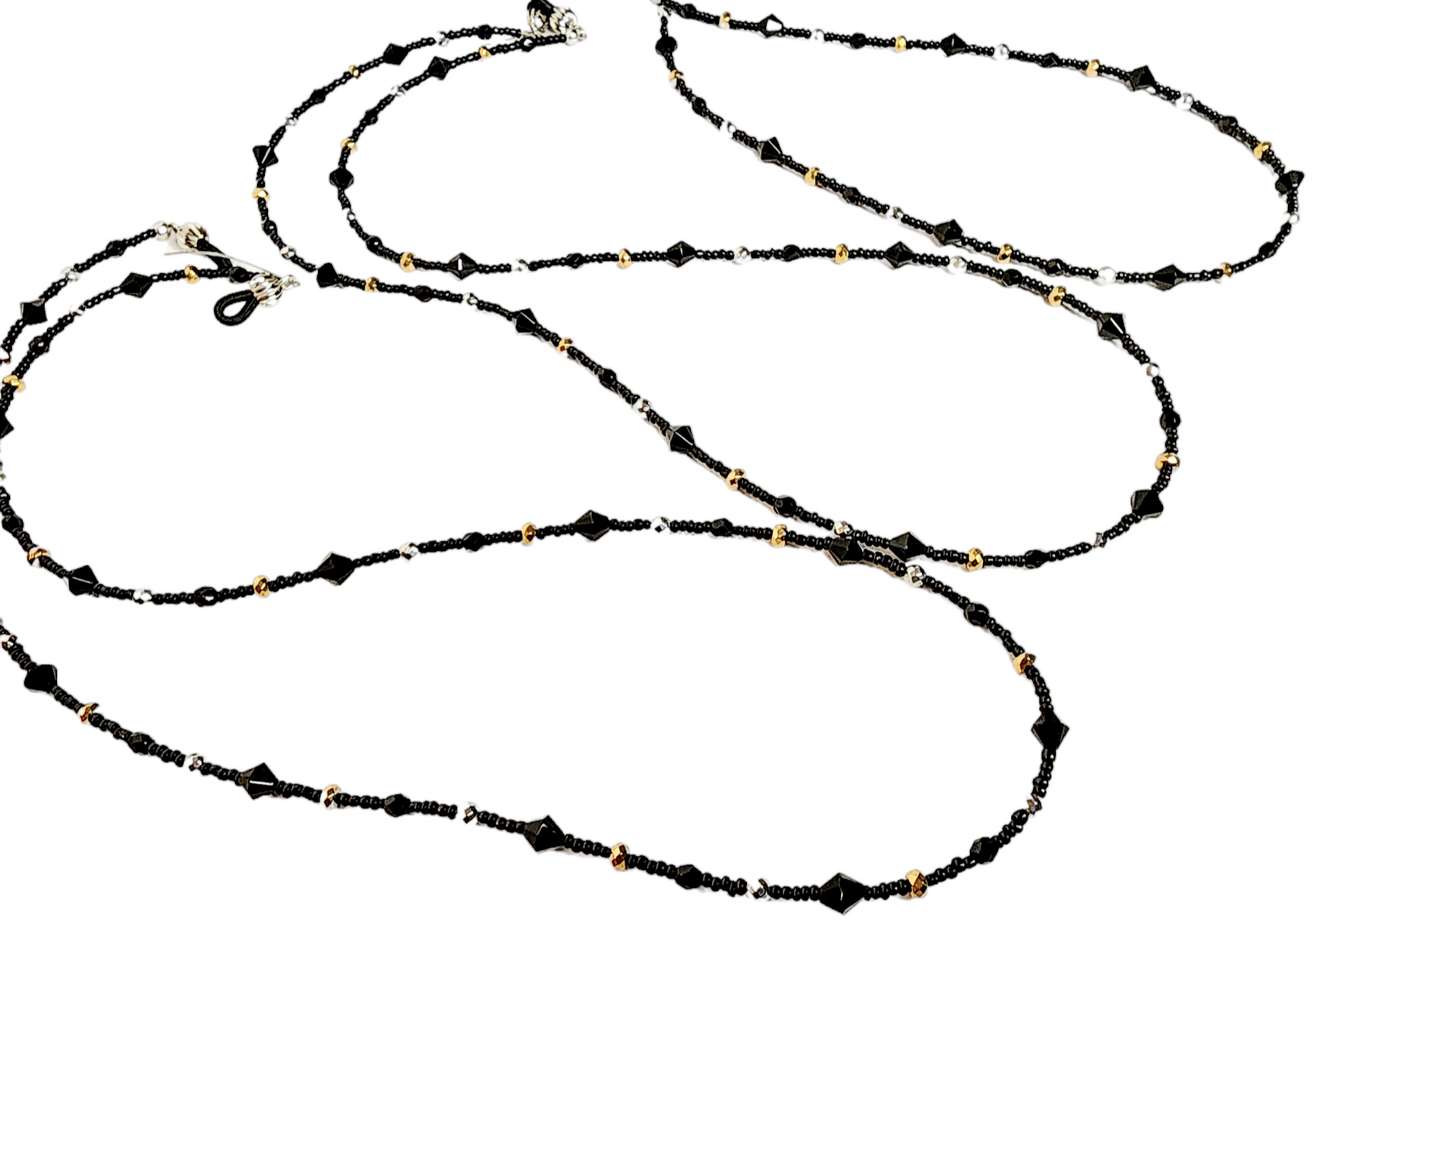 Deluxe Beaded Eyeglass Chain, Sparkly Black glass beads with Gold & Silver Hemalike beads.